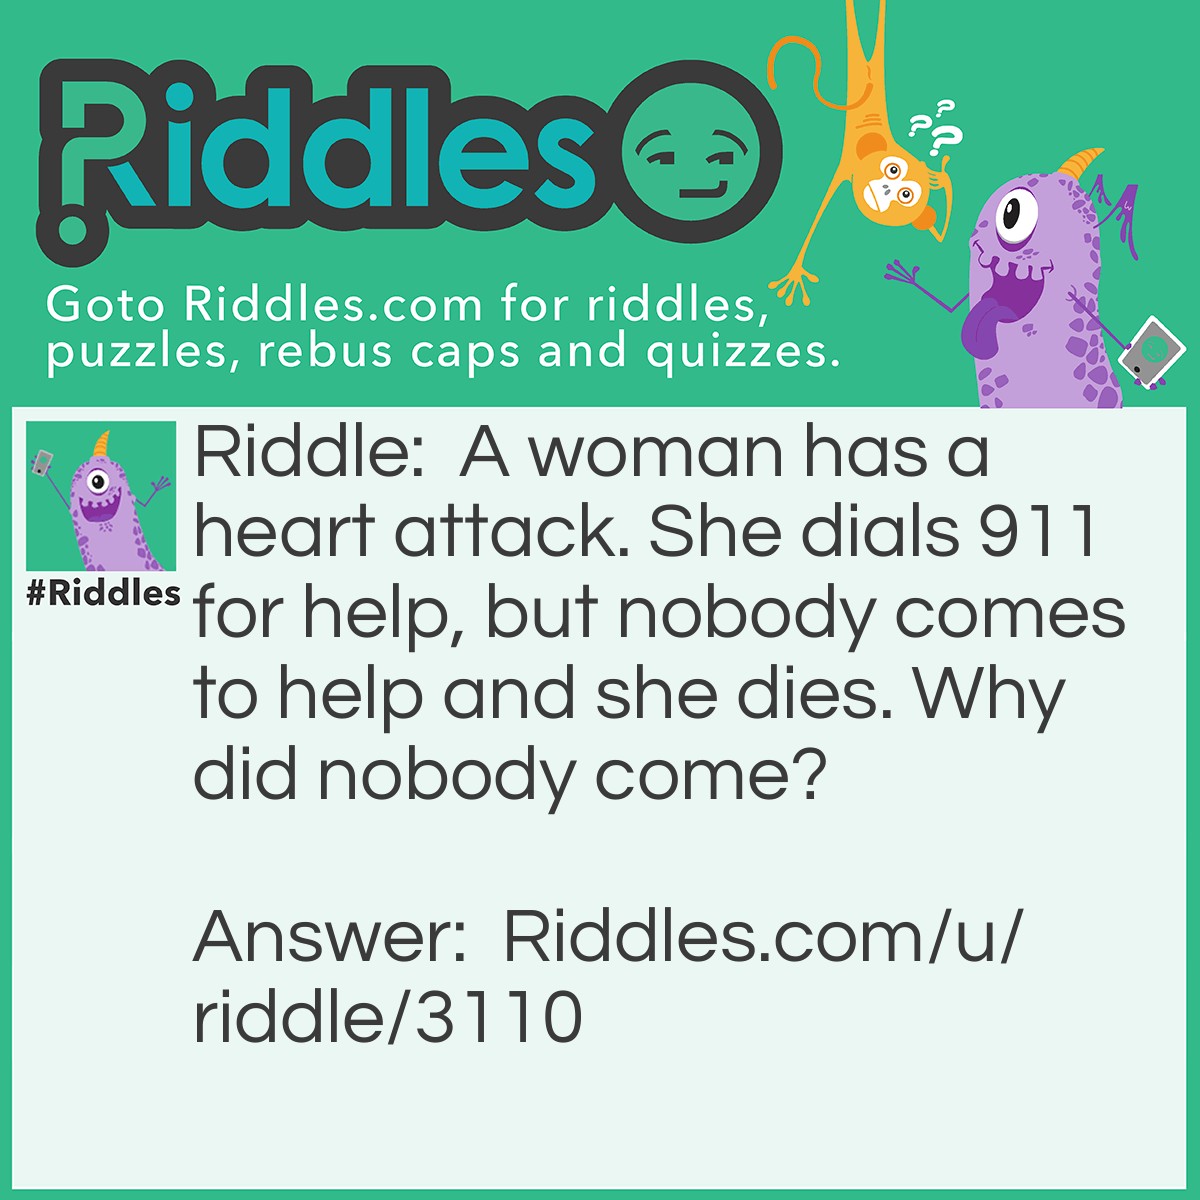 Riddle: A woman has a heart attack. She dials 911 for help, but nobody comes to help and she dies. Why did nobody come? Answer: She dialed 911, but she didn't really call 911 because she didn't press the Call button.